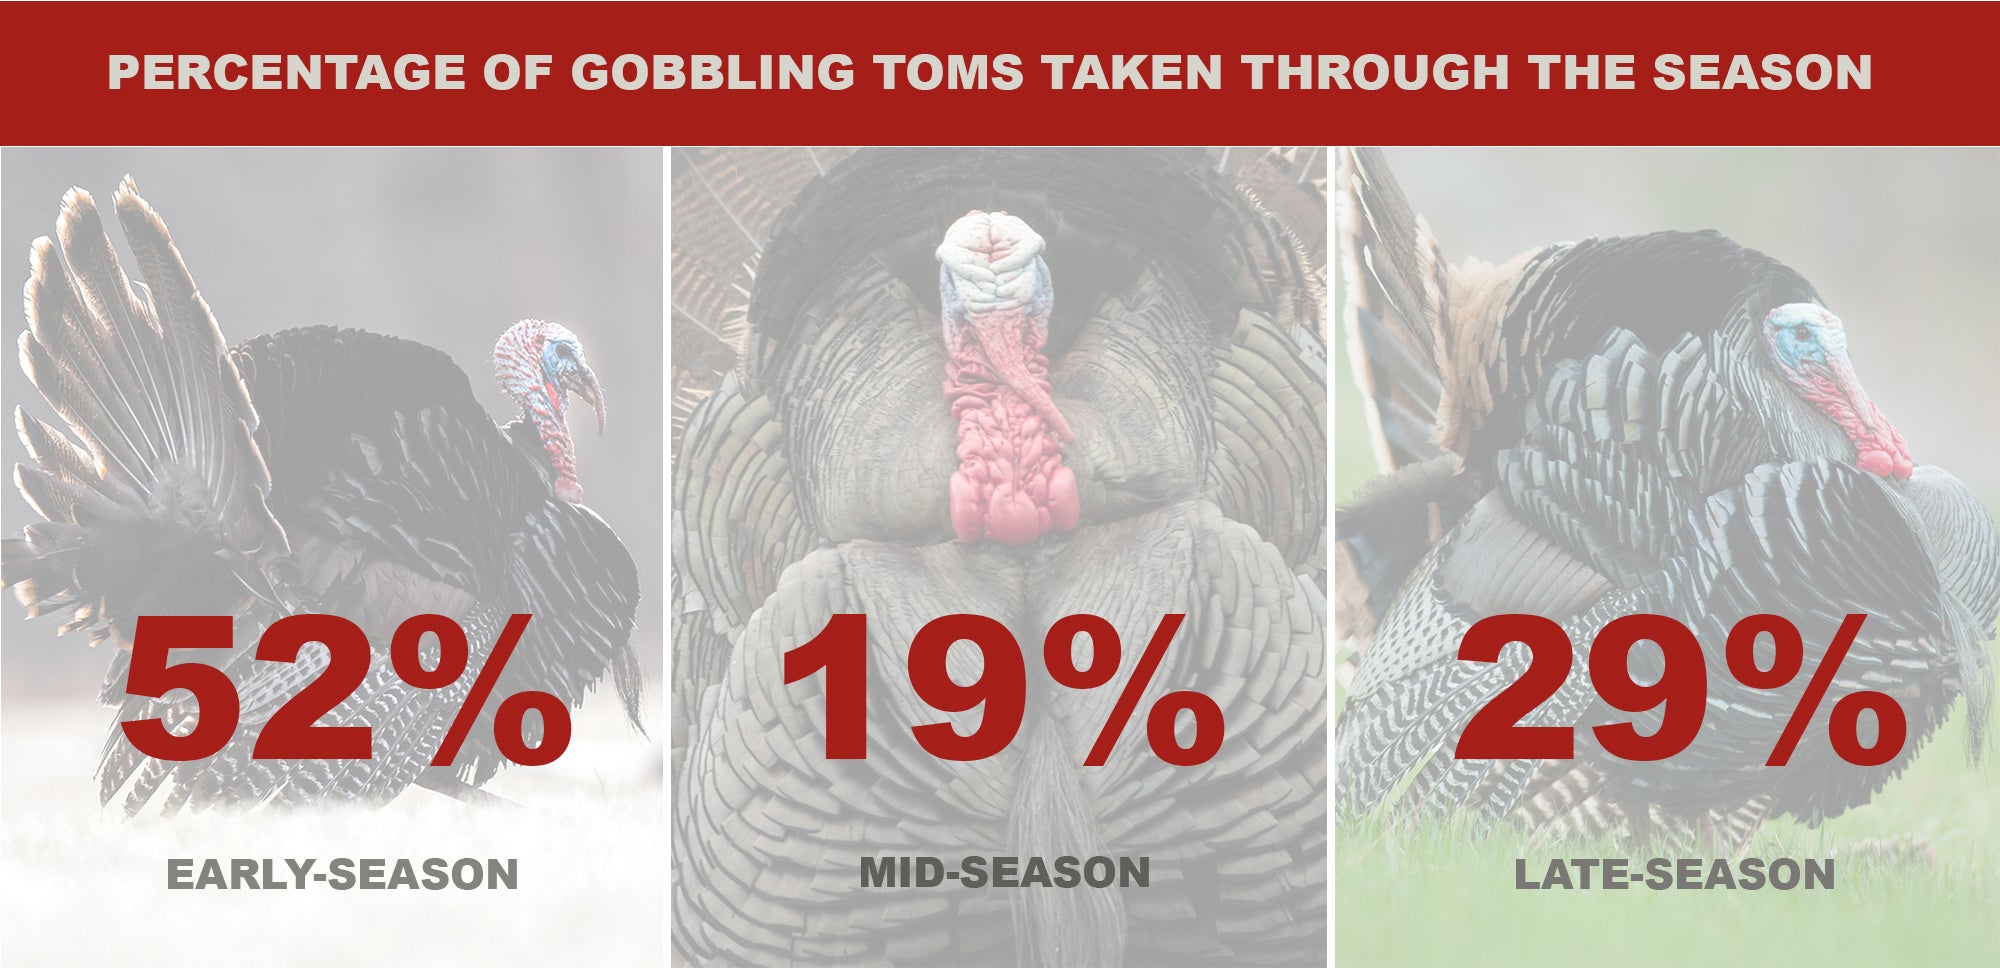 Chart showing turkey hunting success rates during early-, mid-, and late-season periods.